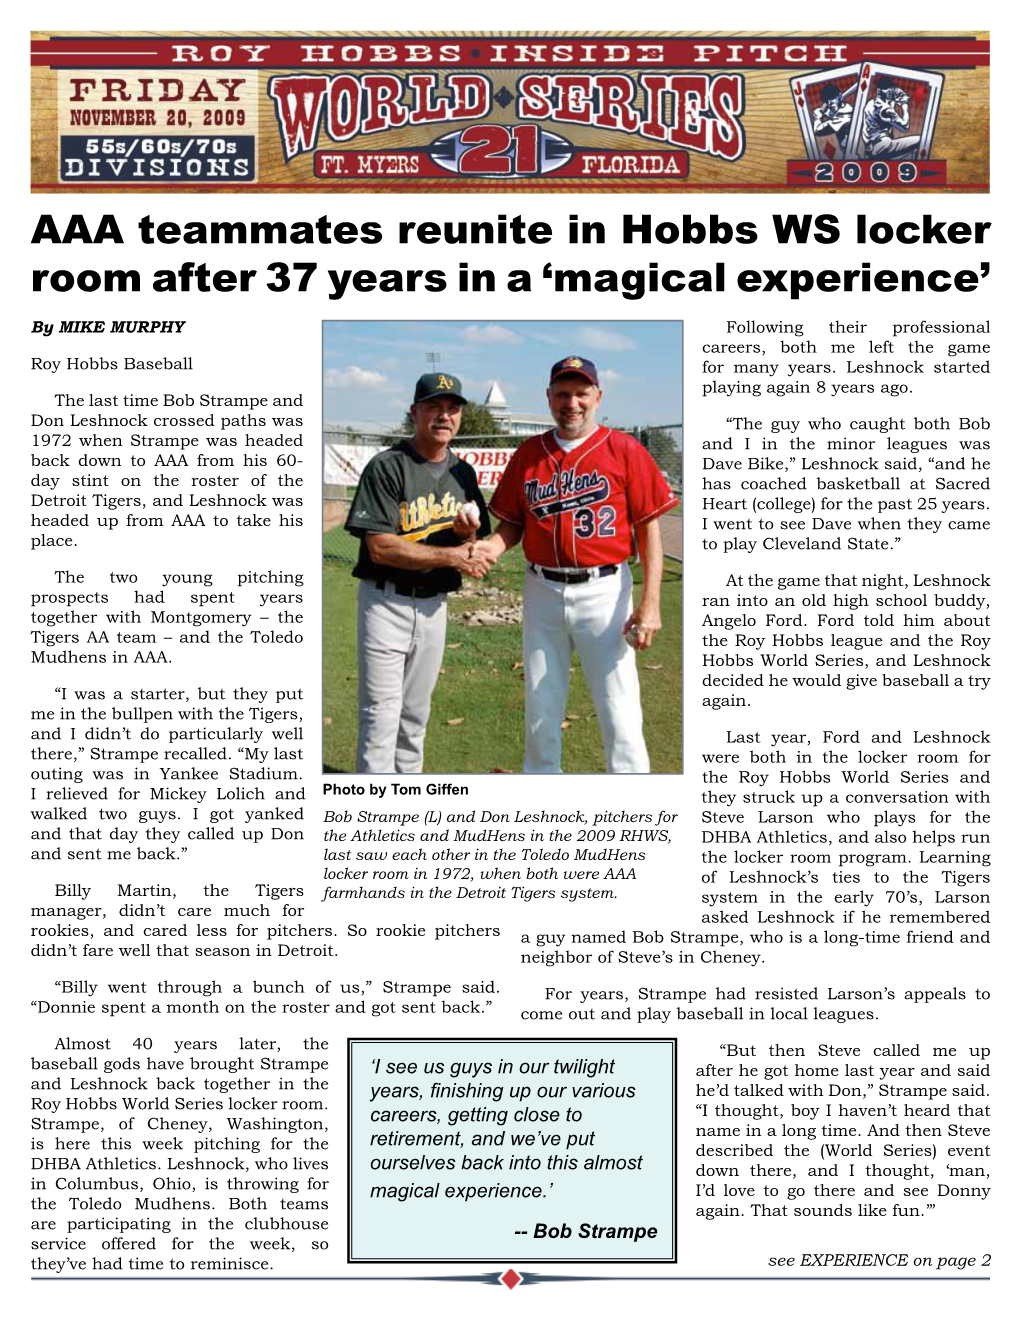 AAA Teammates Reunite in Hobbs WS Locker Room After 37 Years in a ‘Magical Experience’